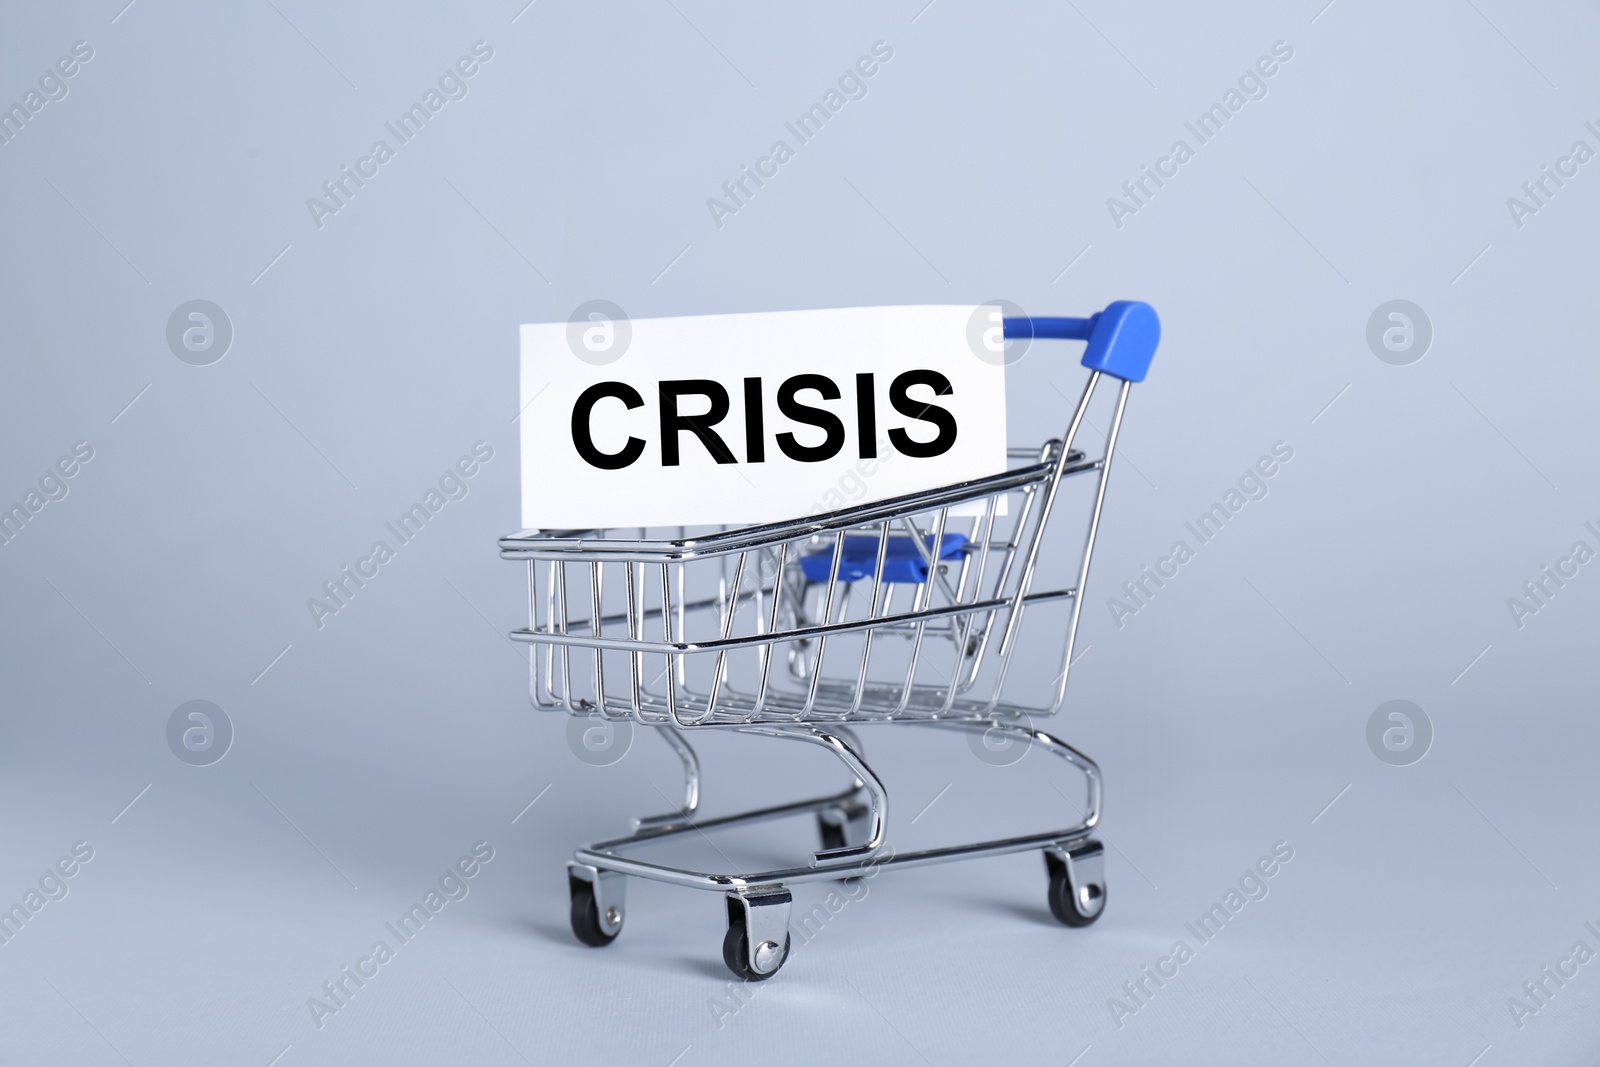 Photo of Mini metal cart and word Crisis on light background